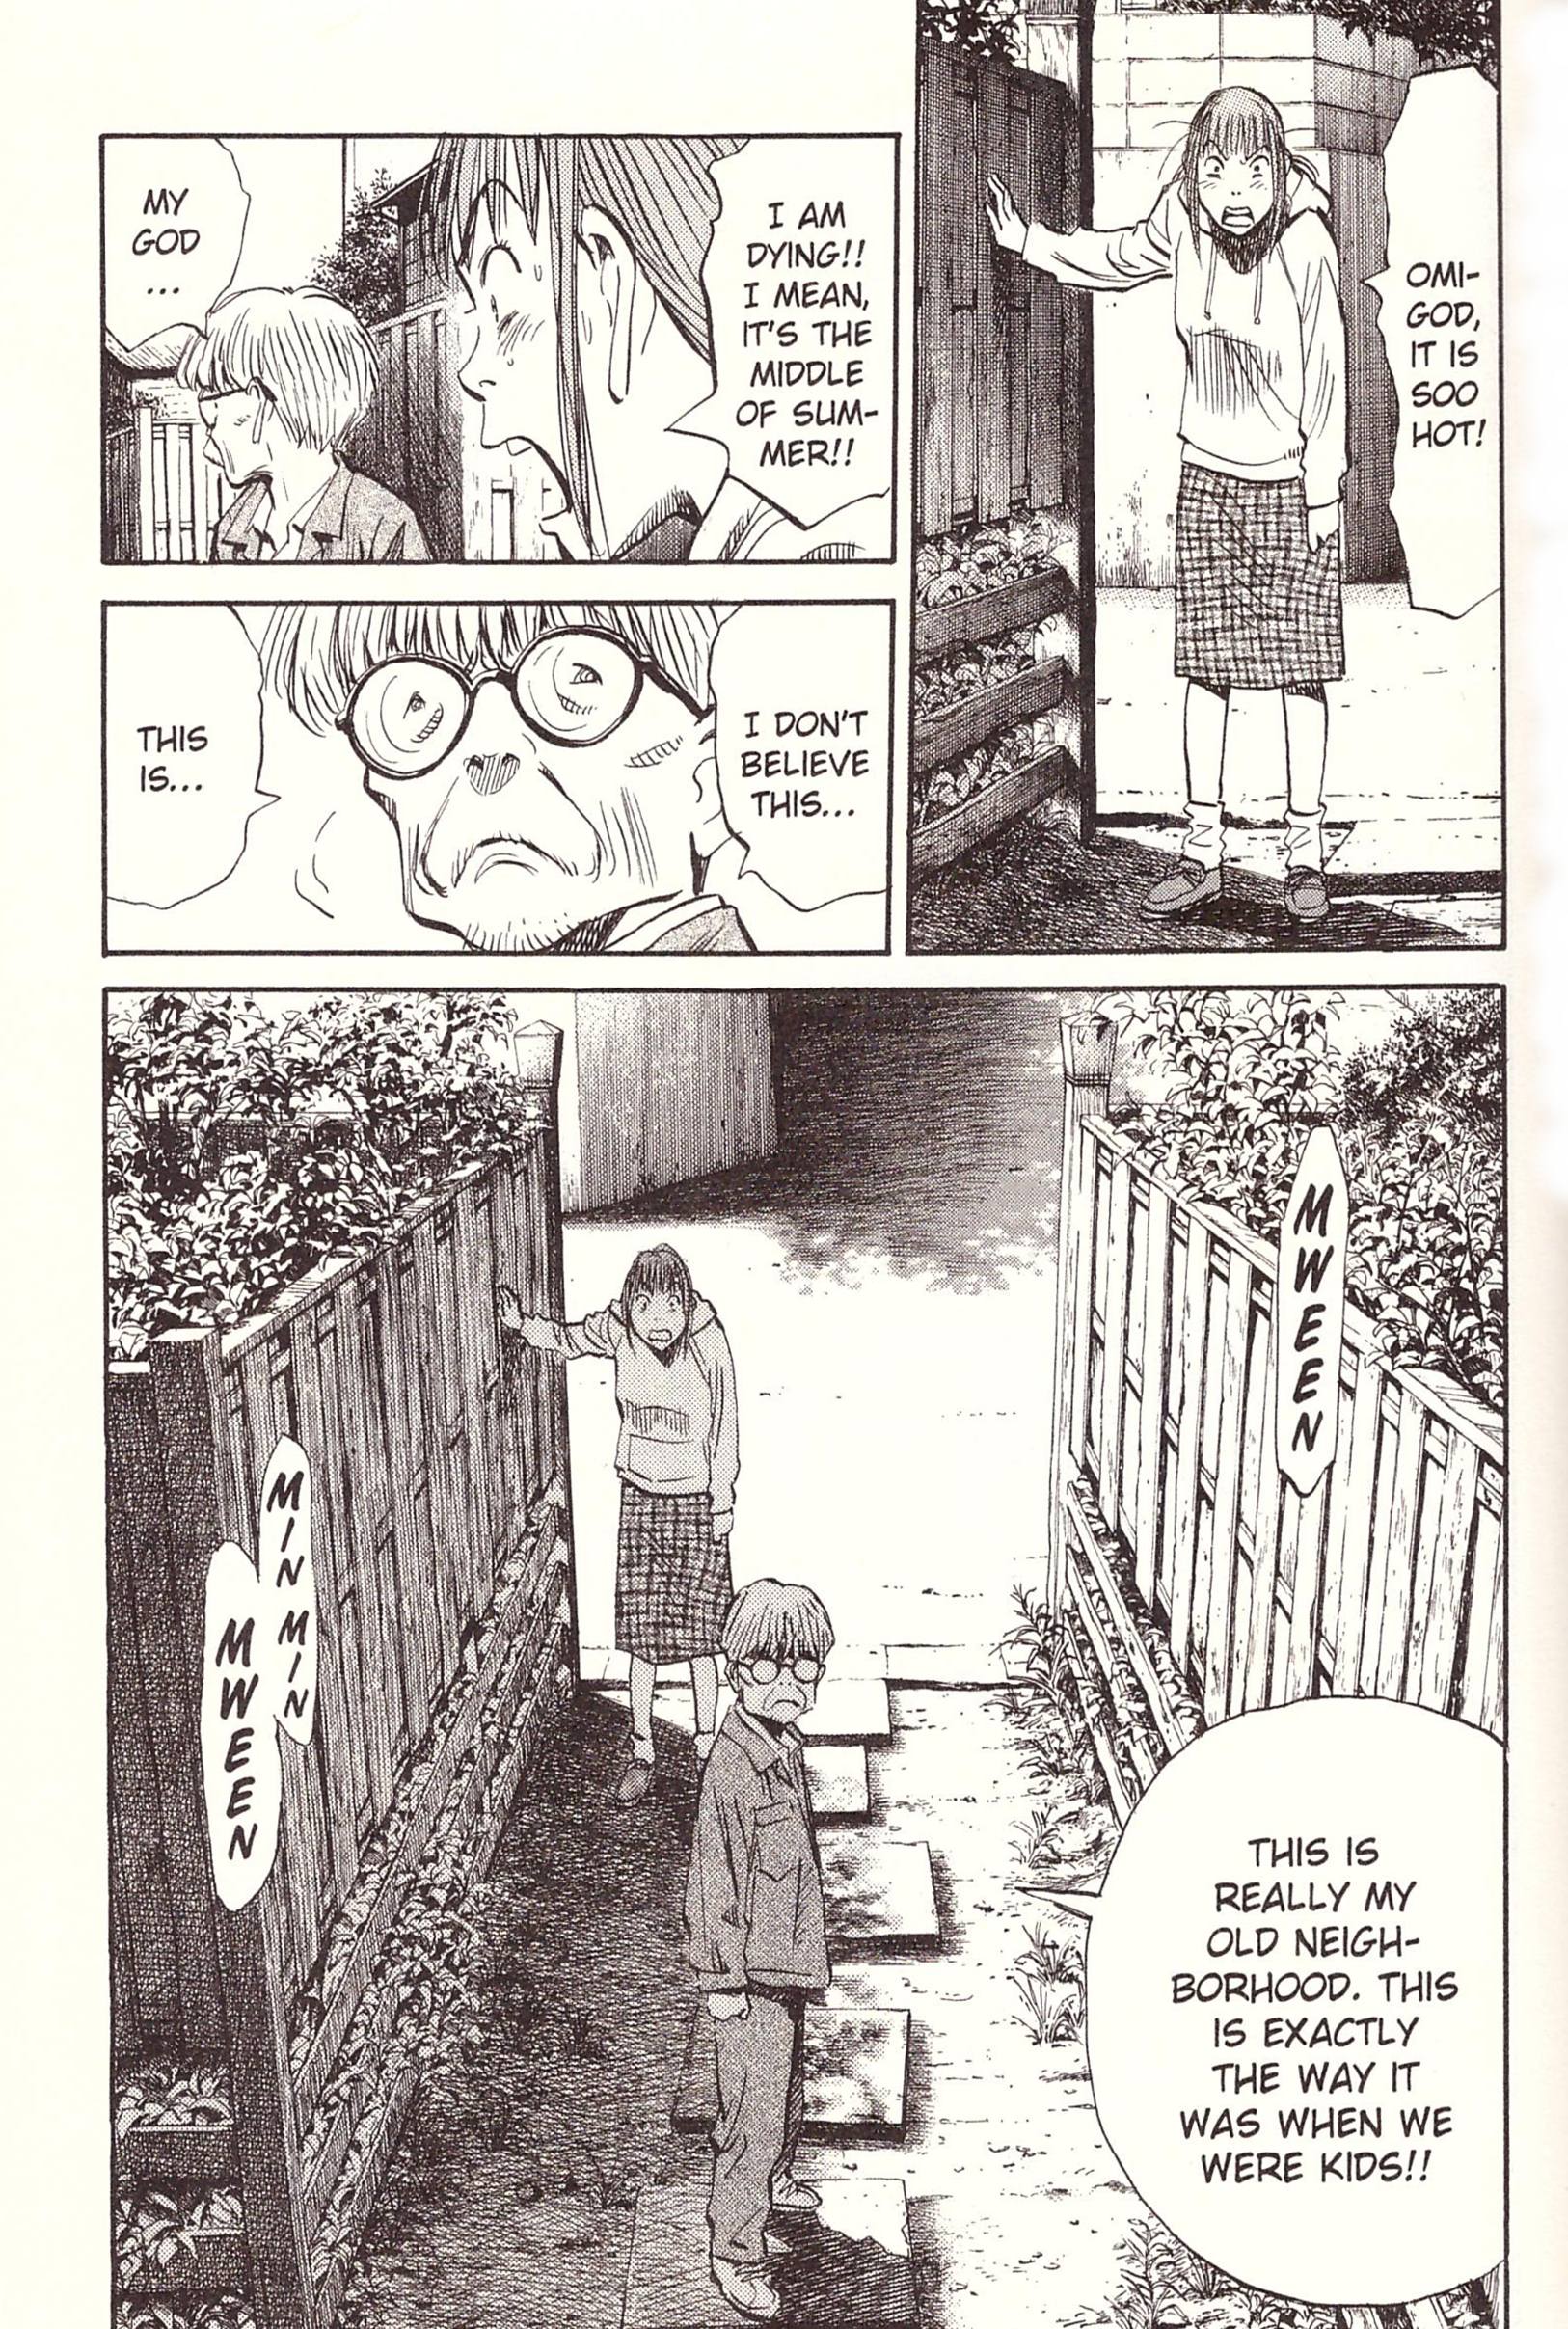 20th Century Boys 14 review